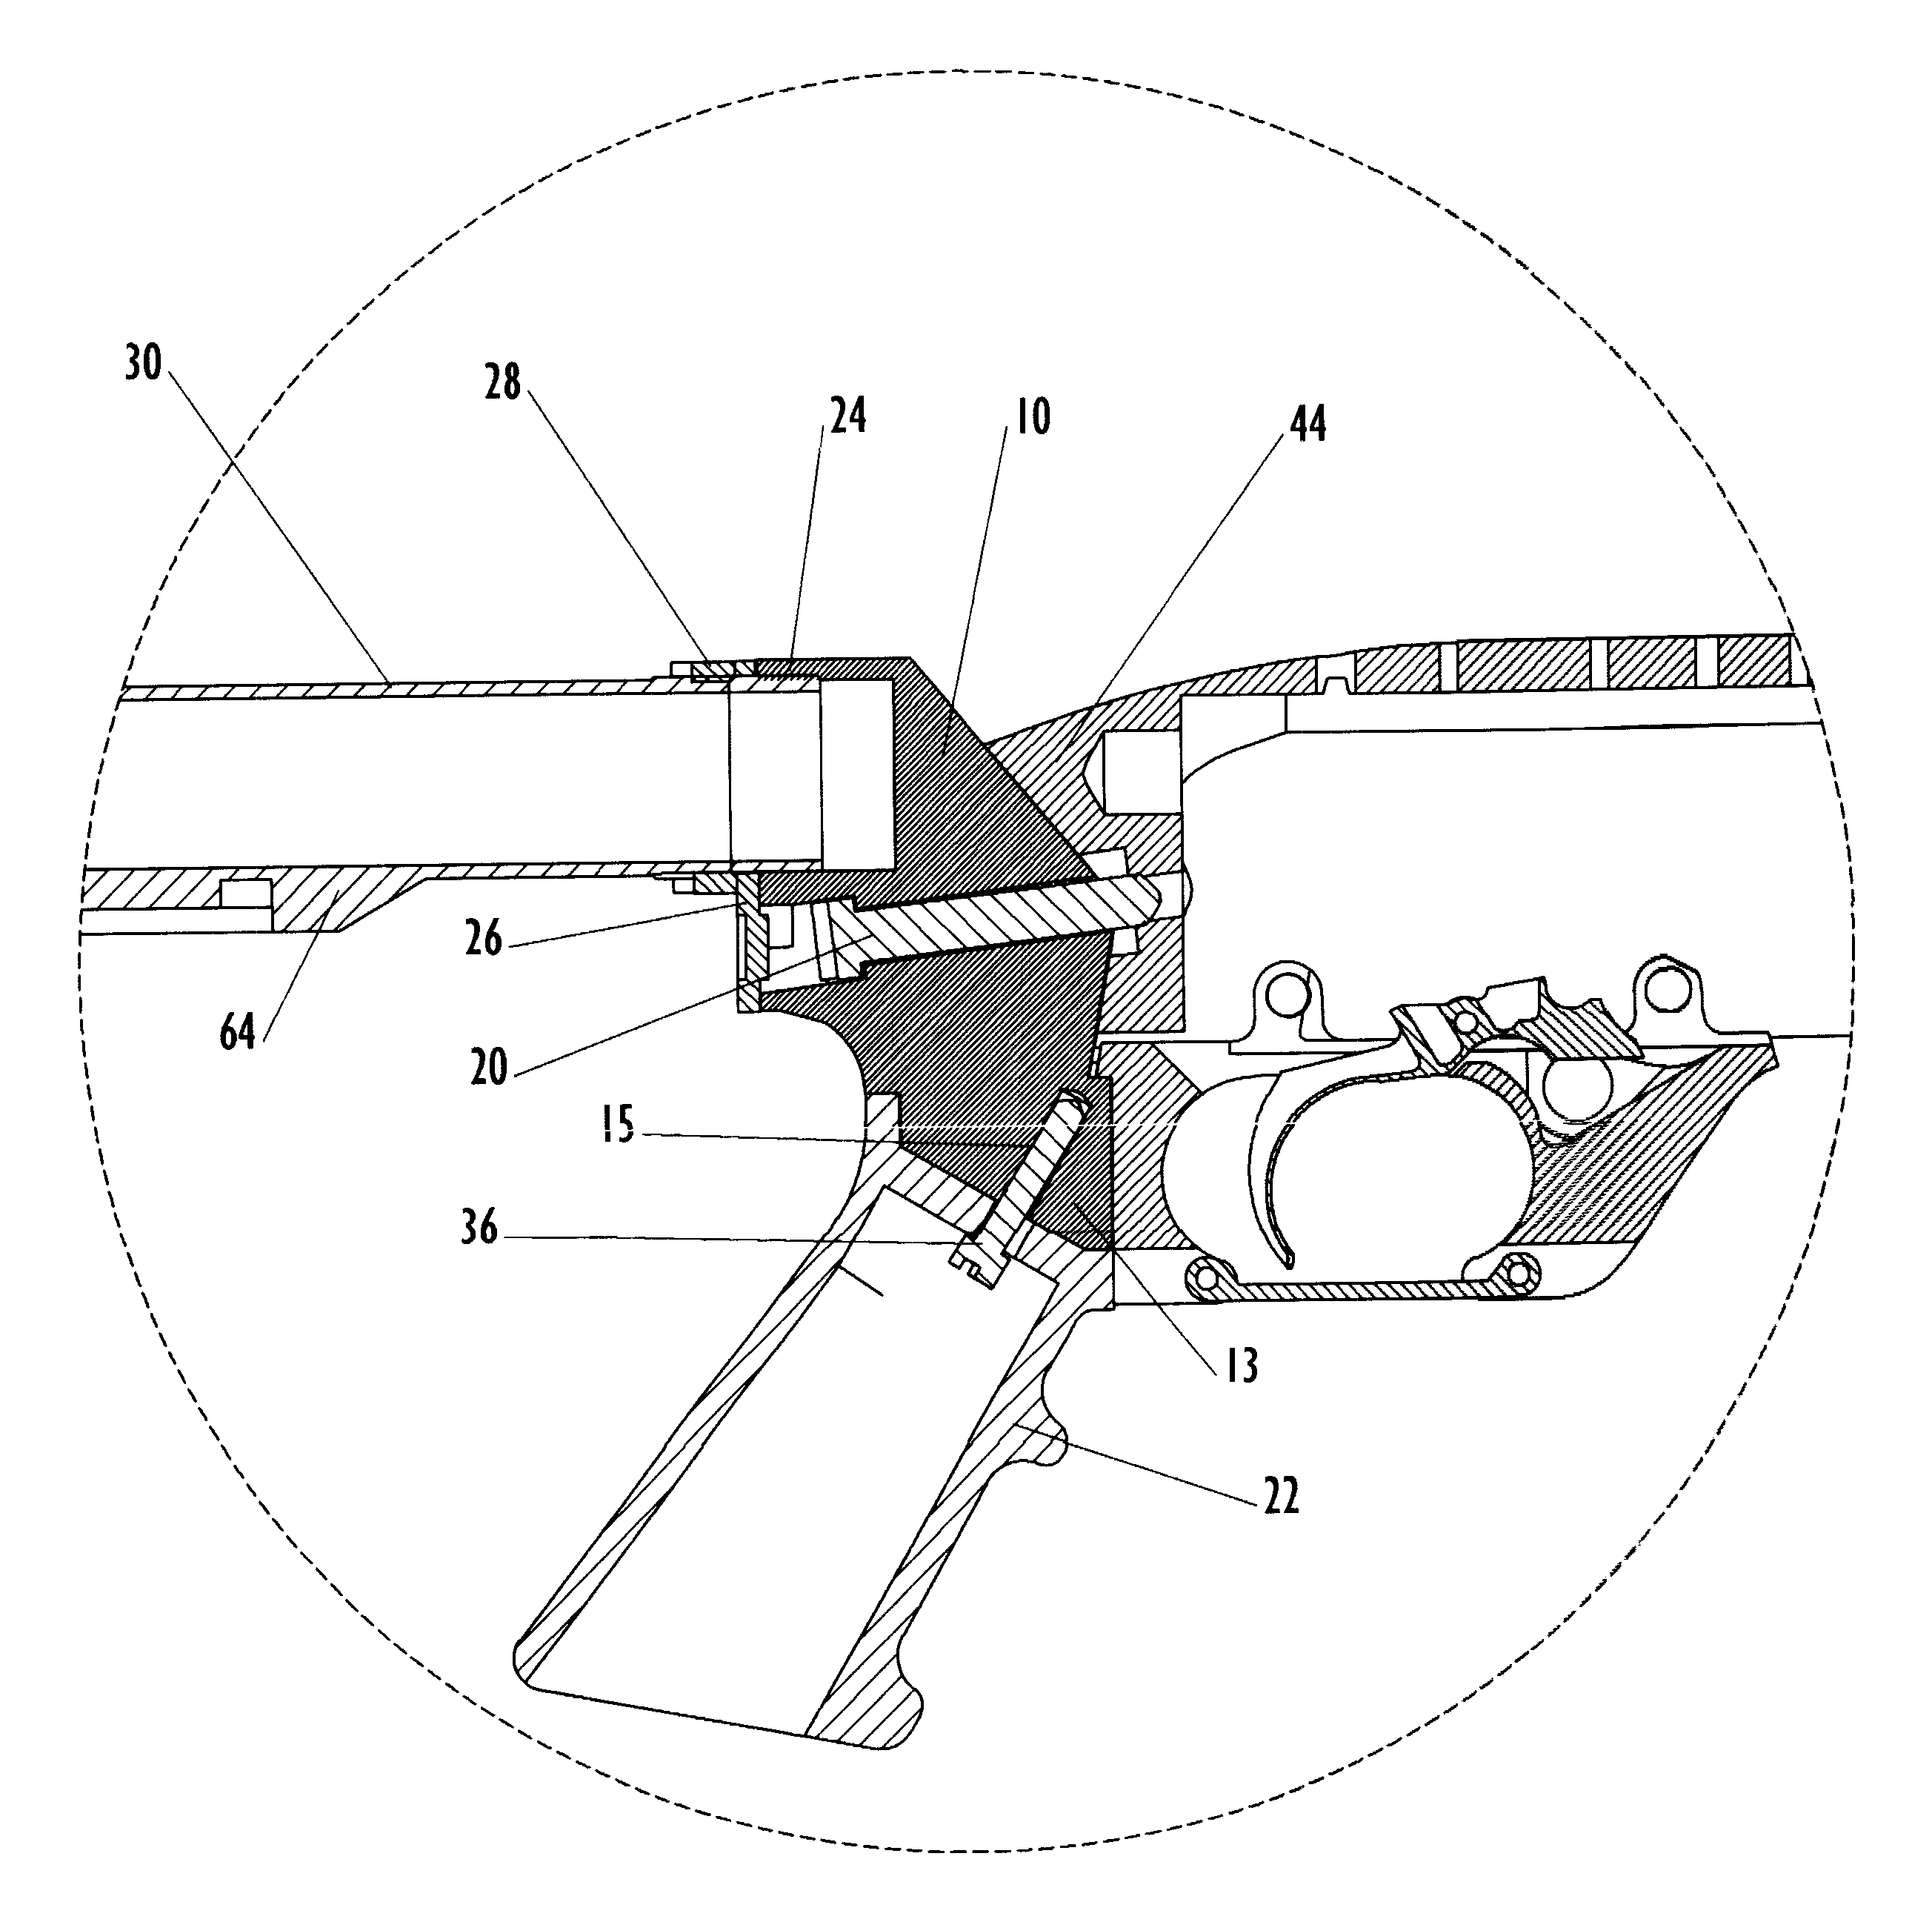 Firearm interface for a buttstock and pistol grip